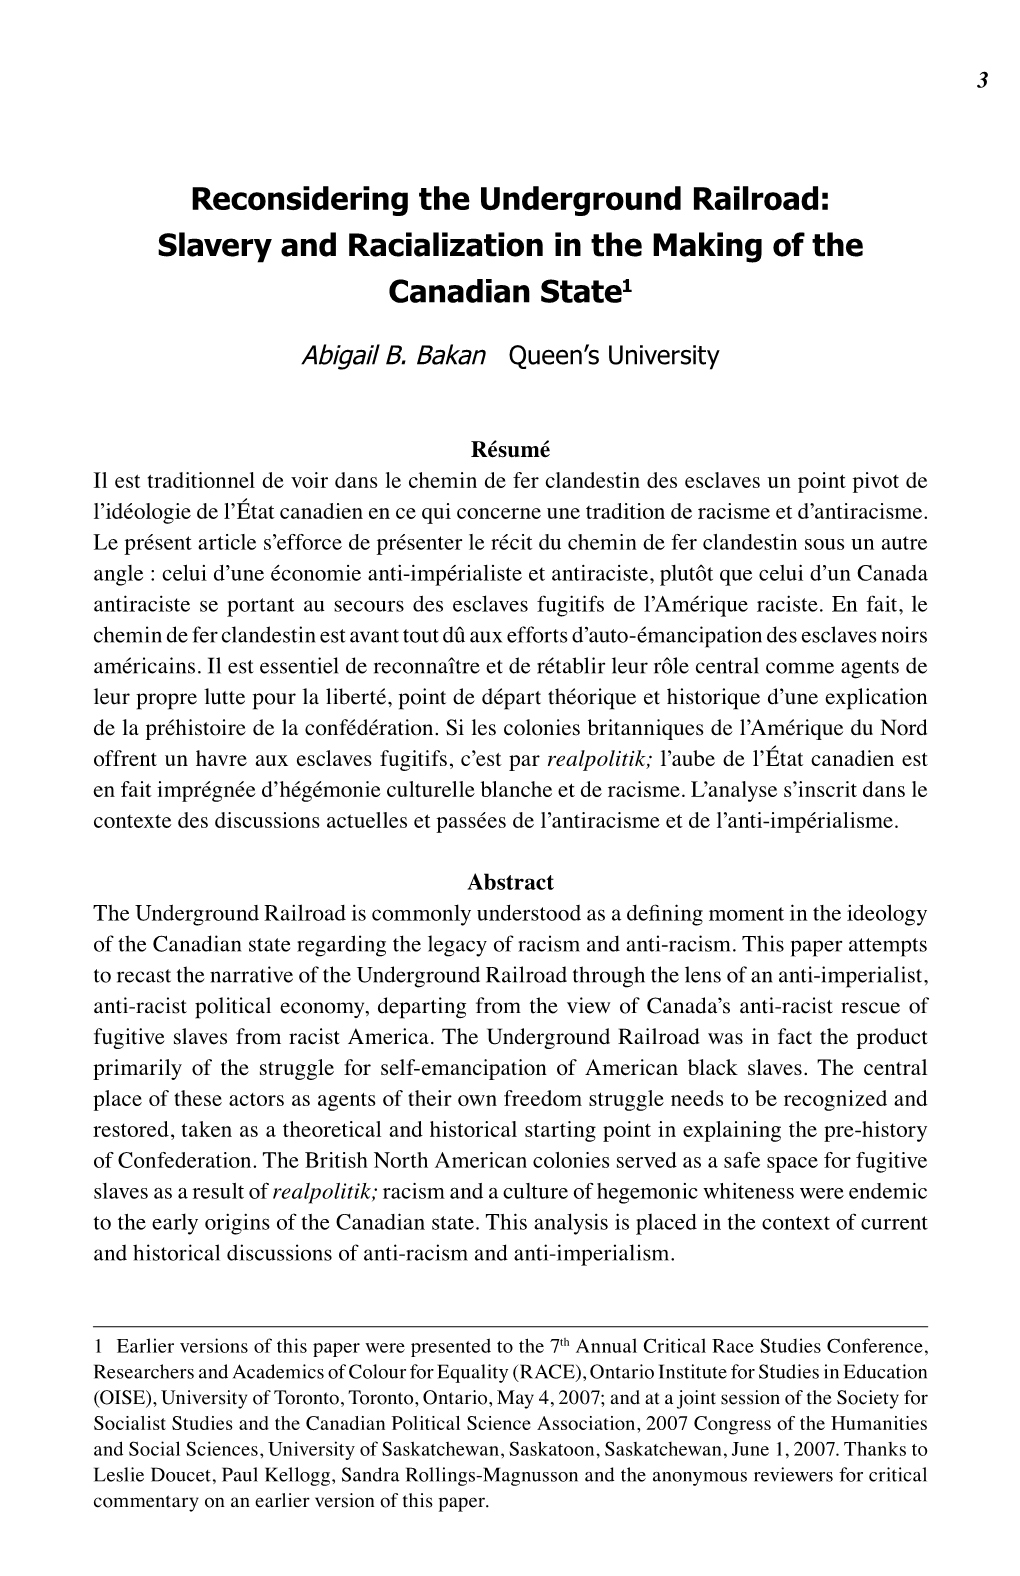 Reconsidering the Underground Railroad: Slavery and Racialization in the Making of the Canadian State